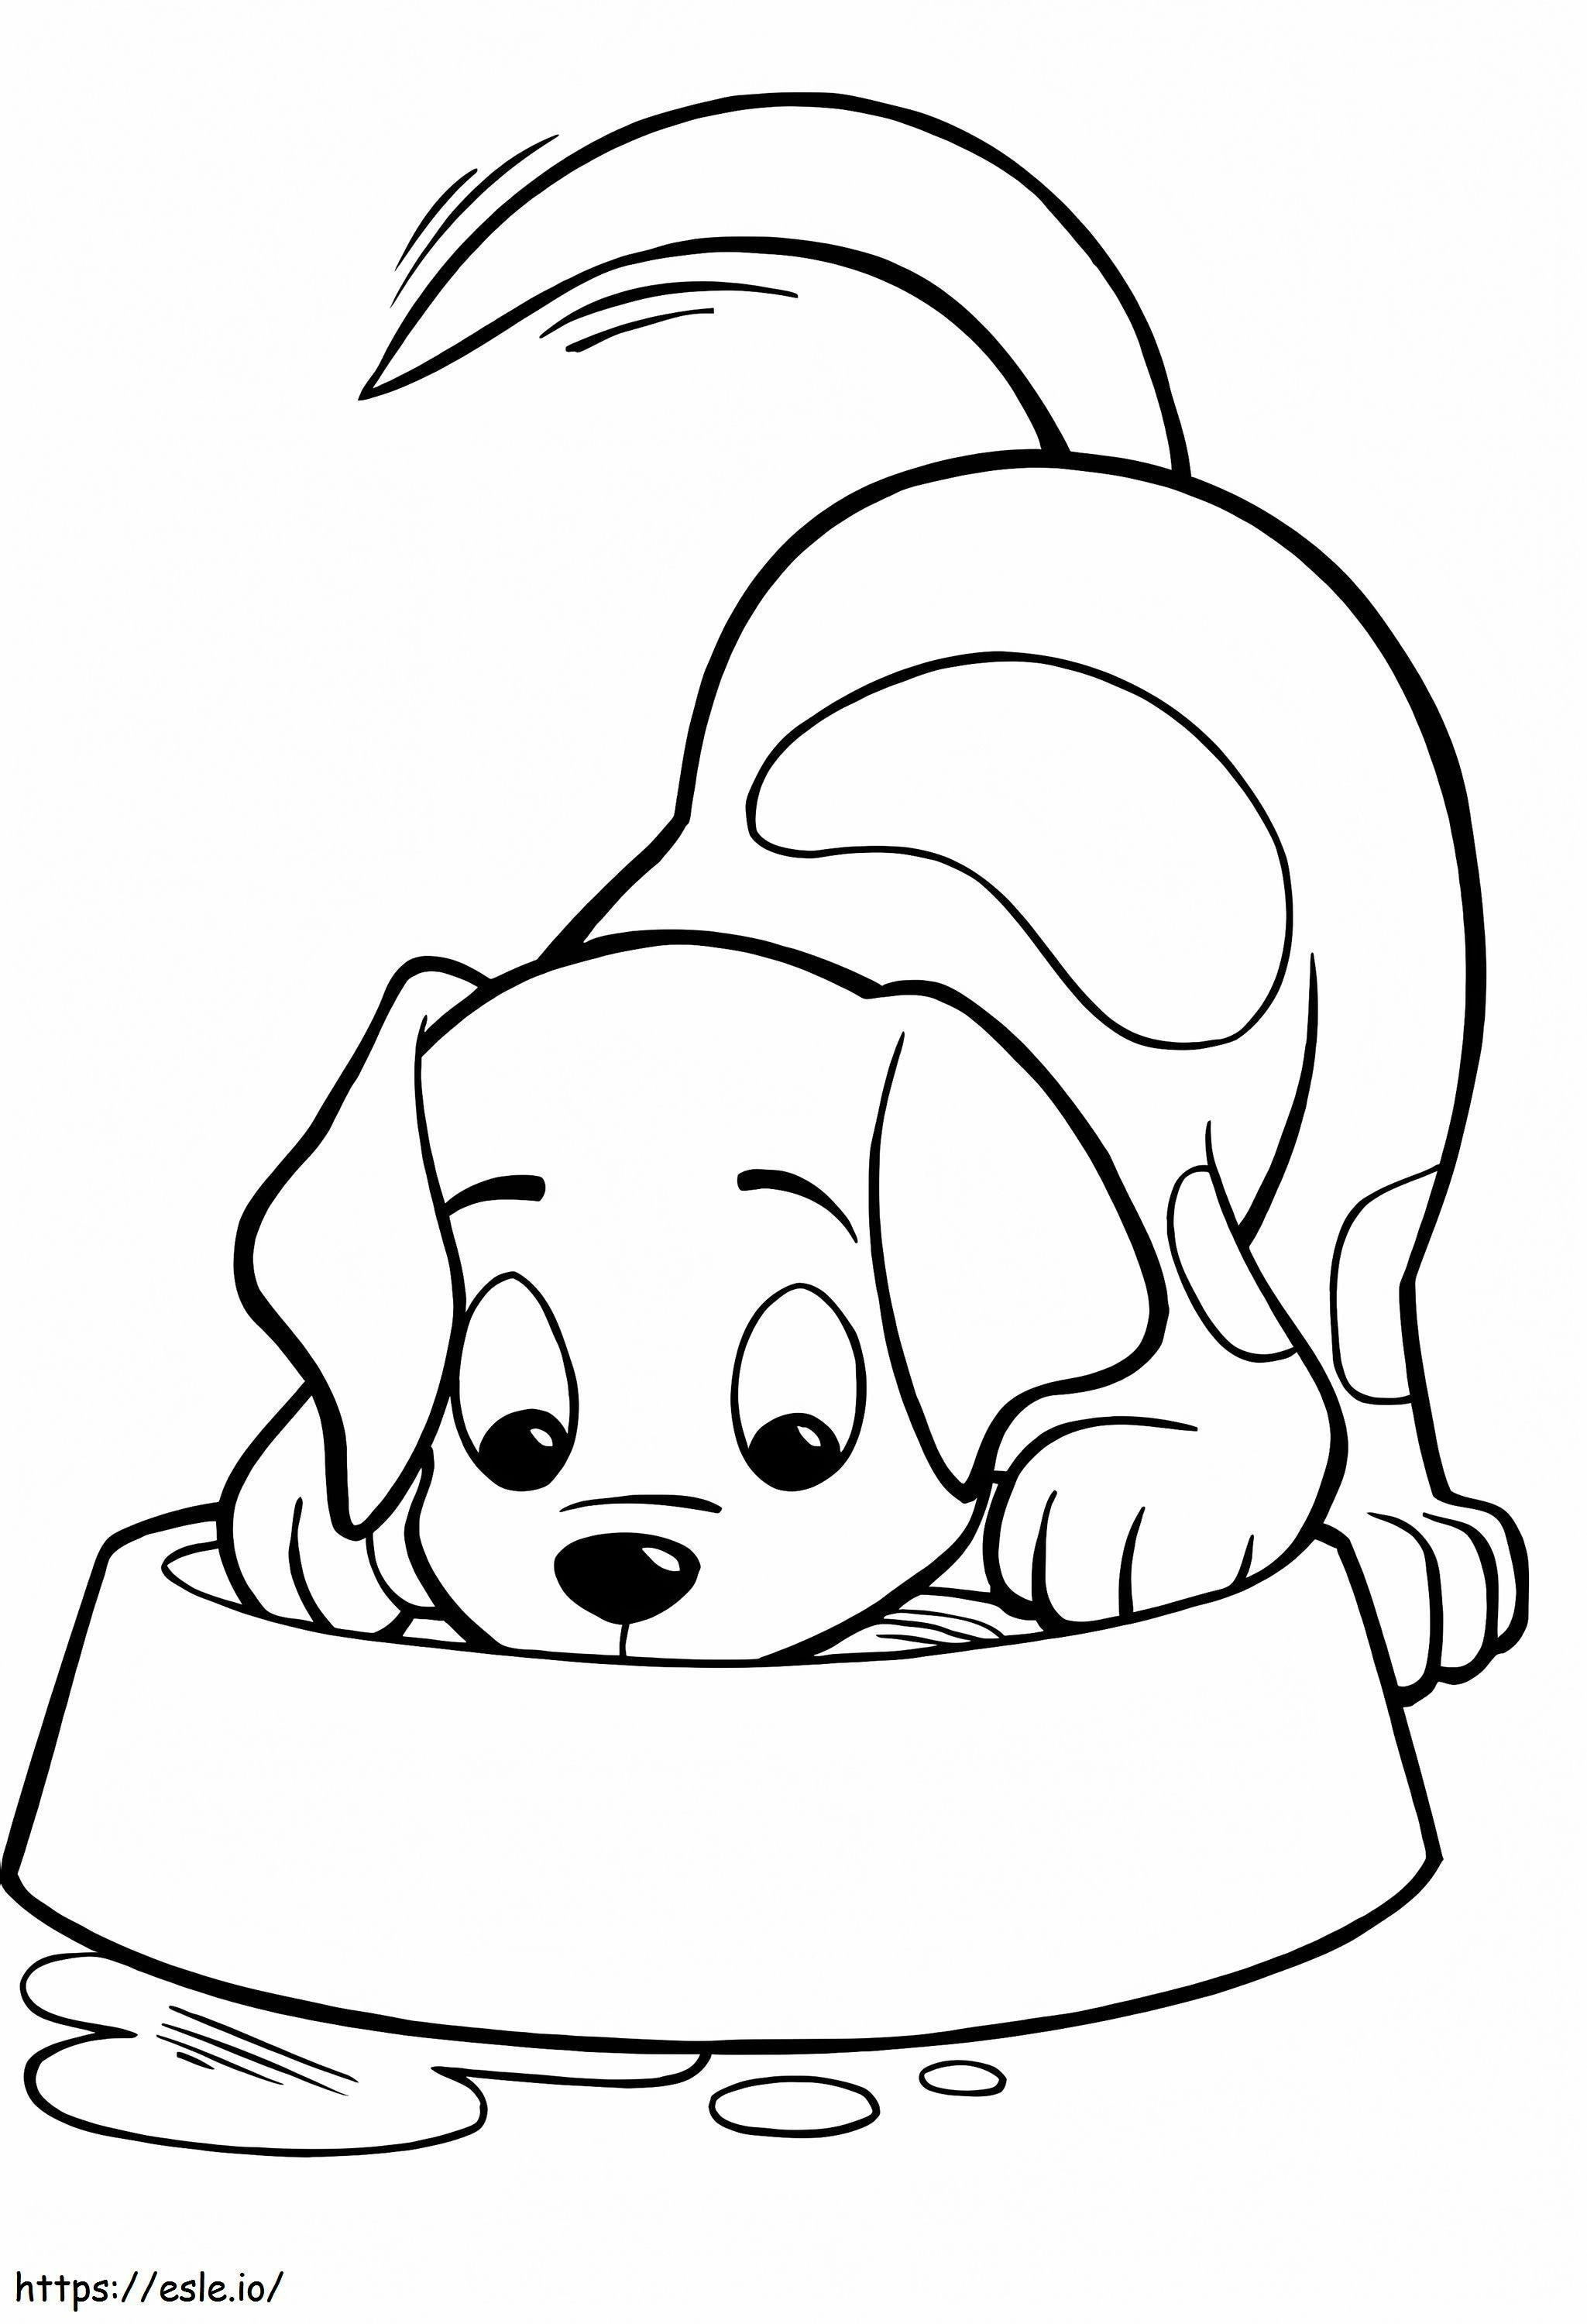 Puppy Drinking Water coloring page